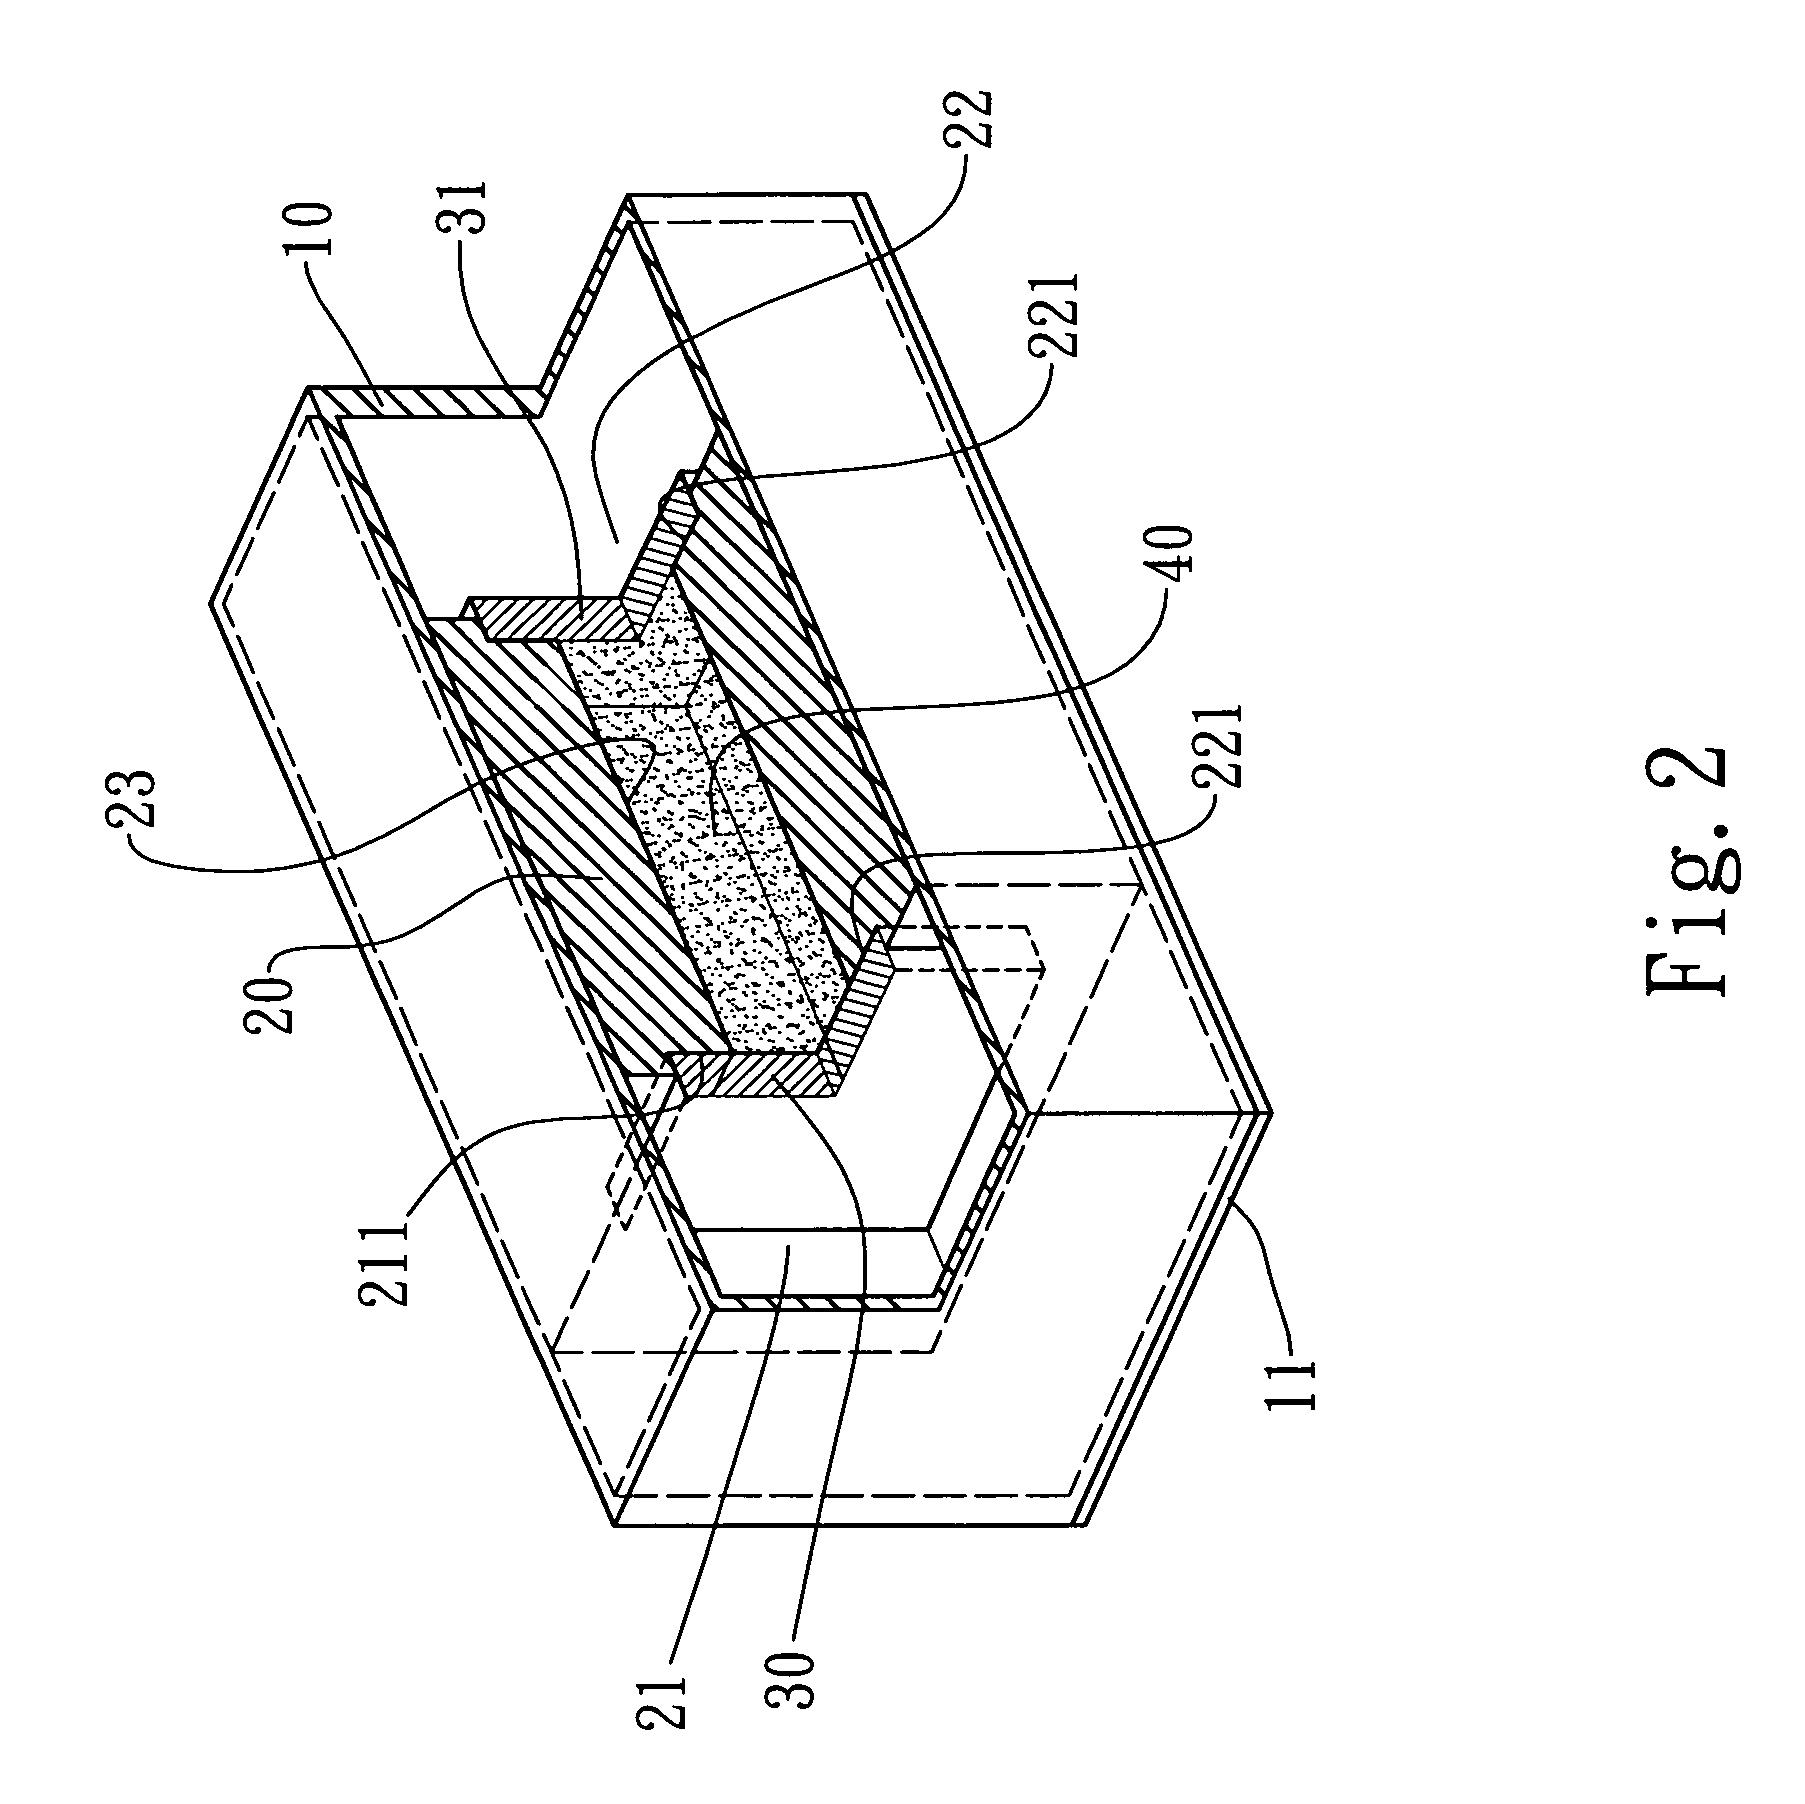 Method for apparatus for a drop indicator